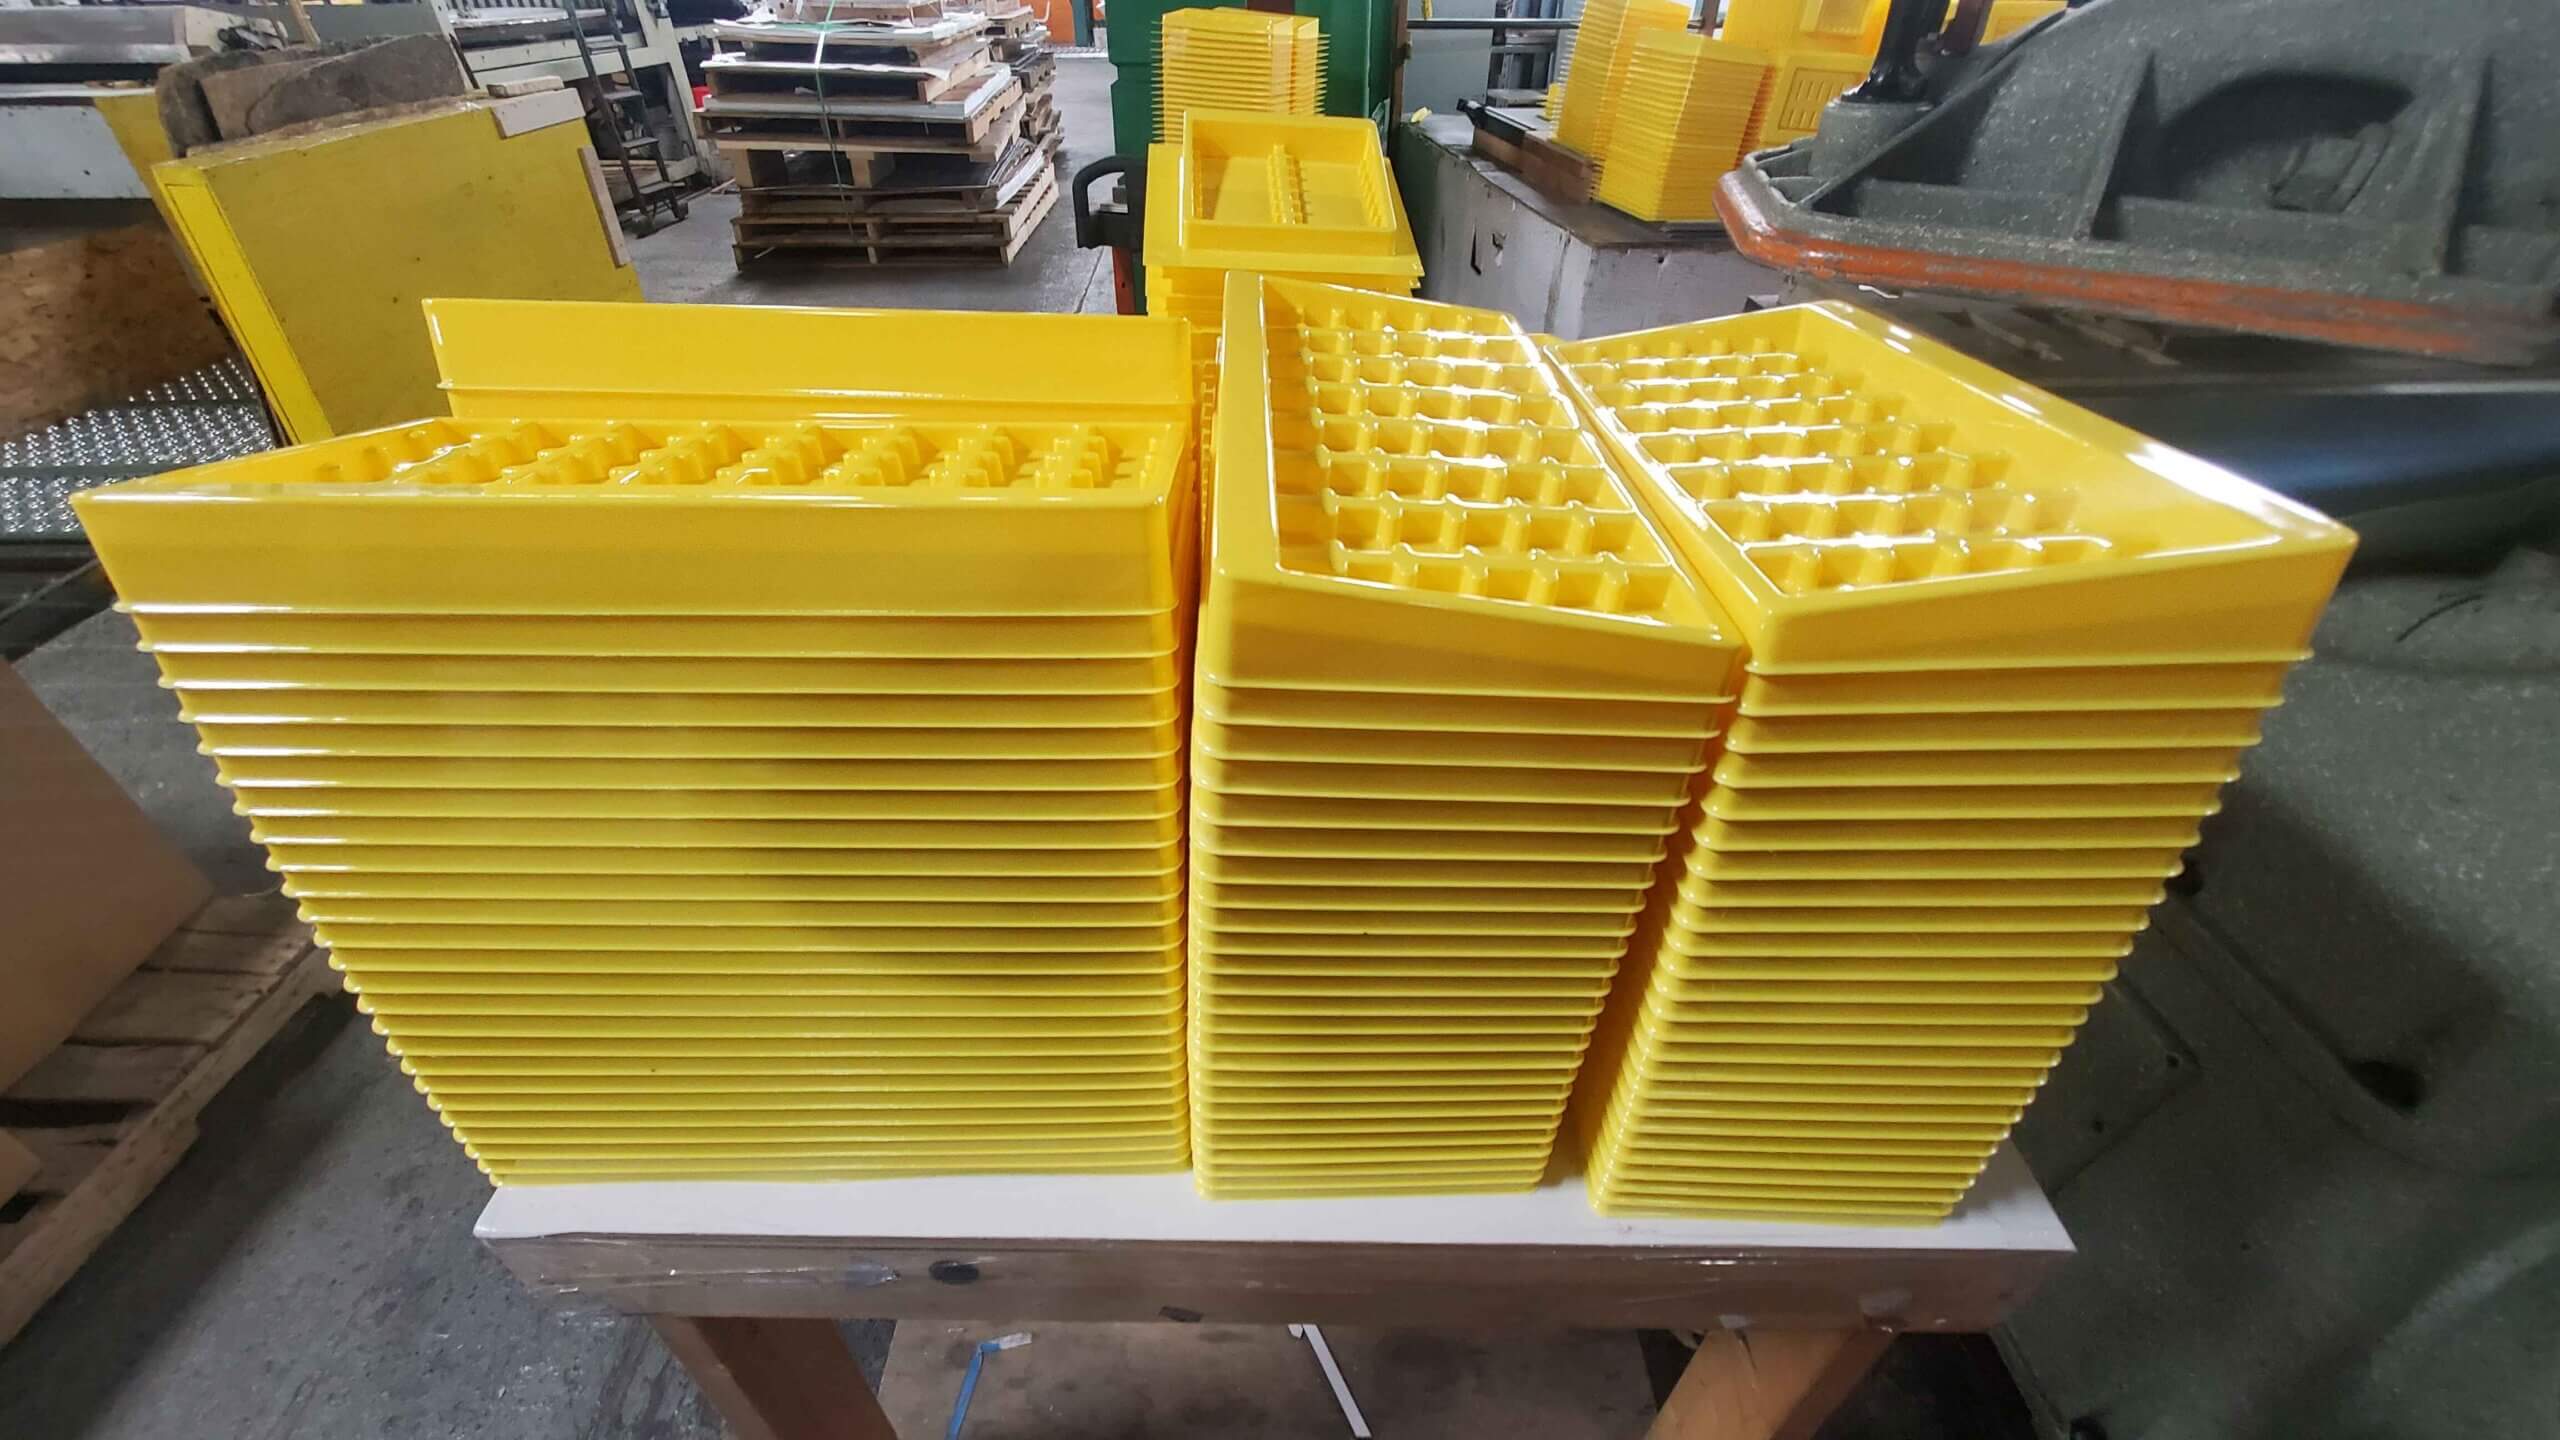 Thermoforming 1